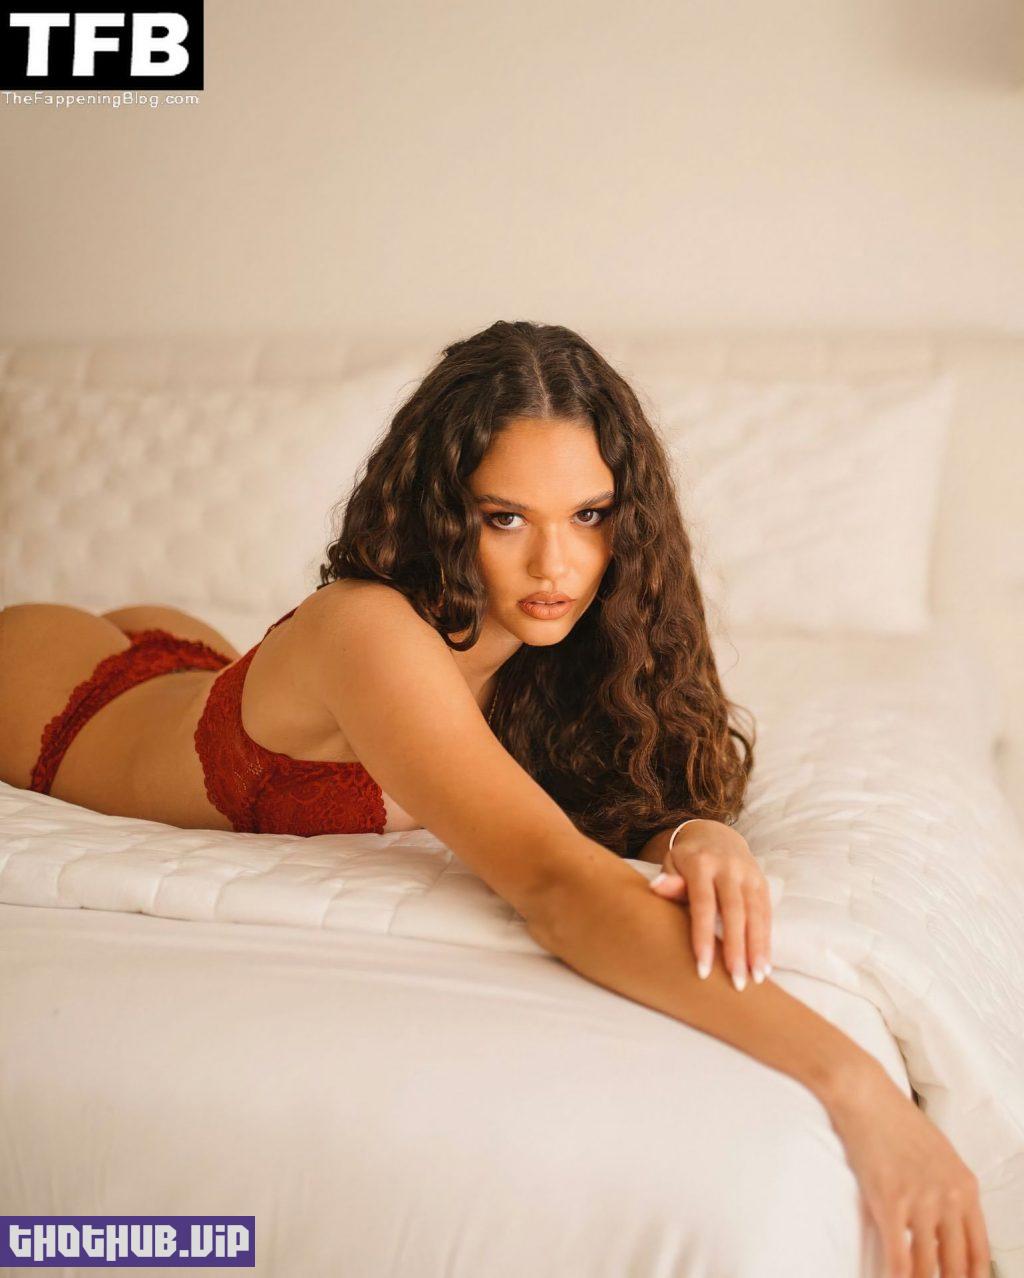 Madison Pettis Gorgeous BOdy in Lingerie 2 1 thefappeningblog.com